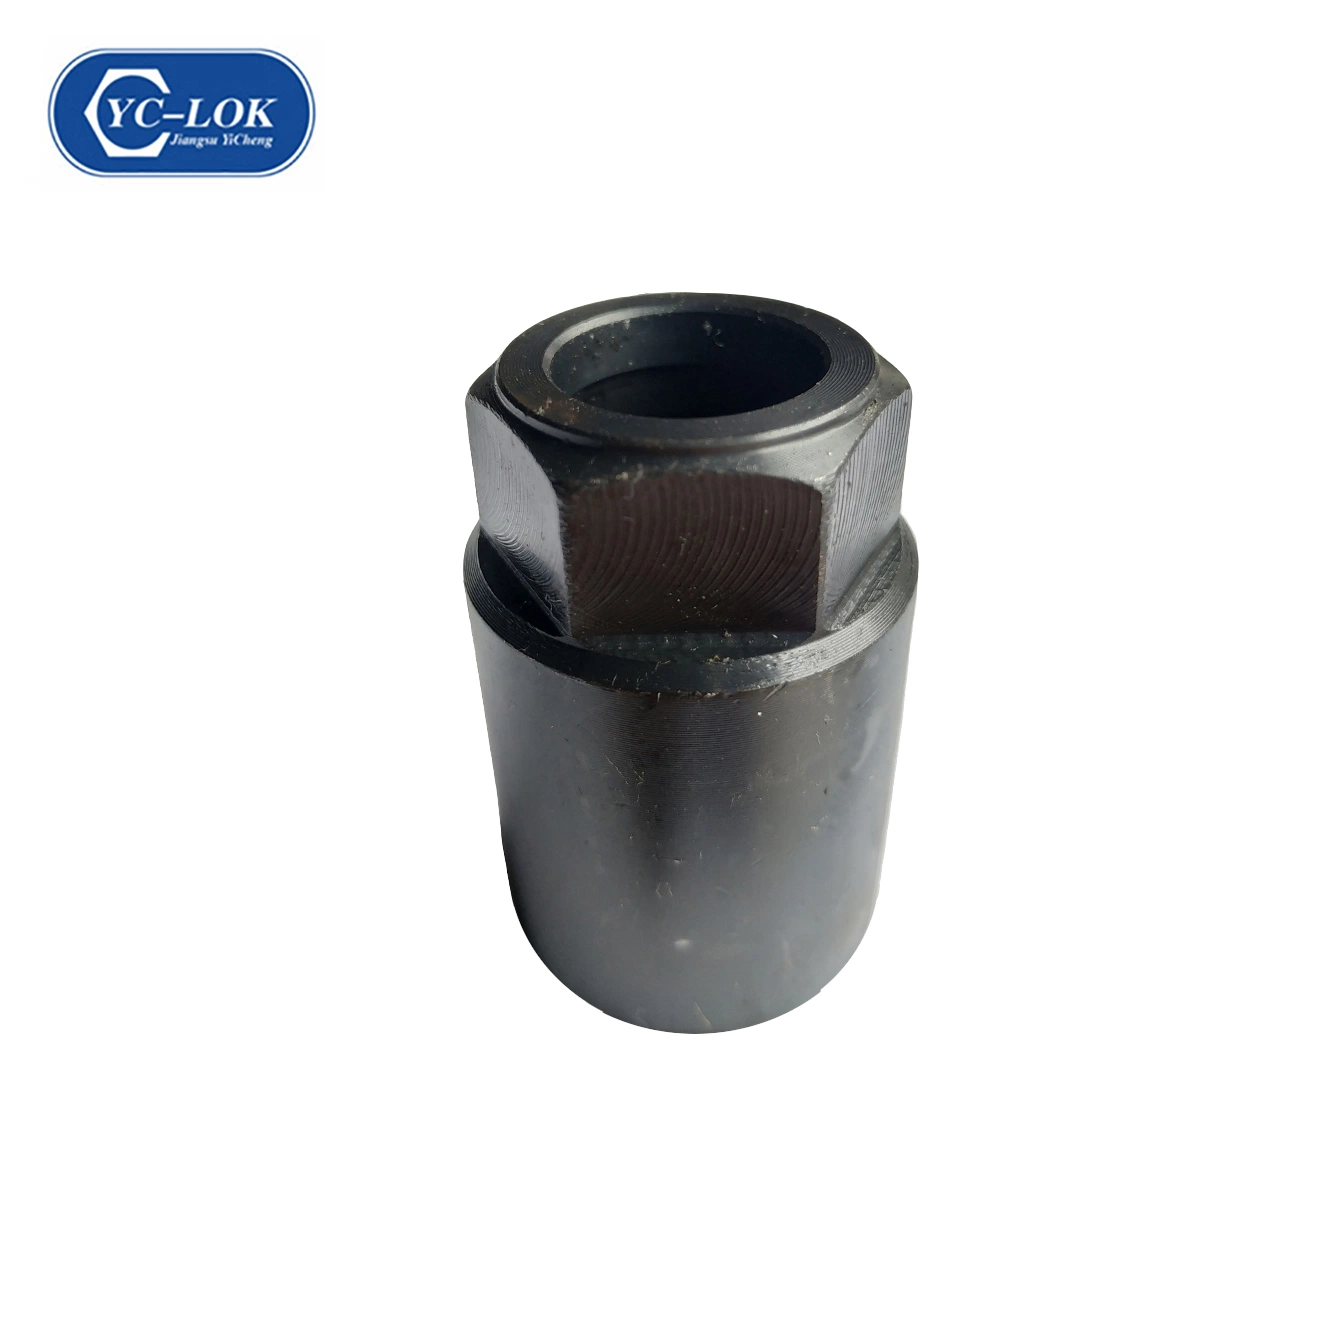 Metric L S Series Rataining Nuts Hydraulic Hose Fitting Nuts